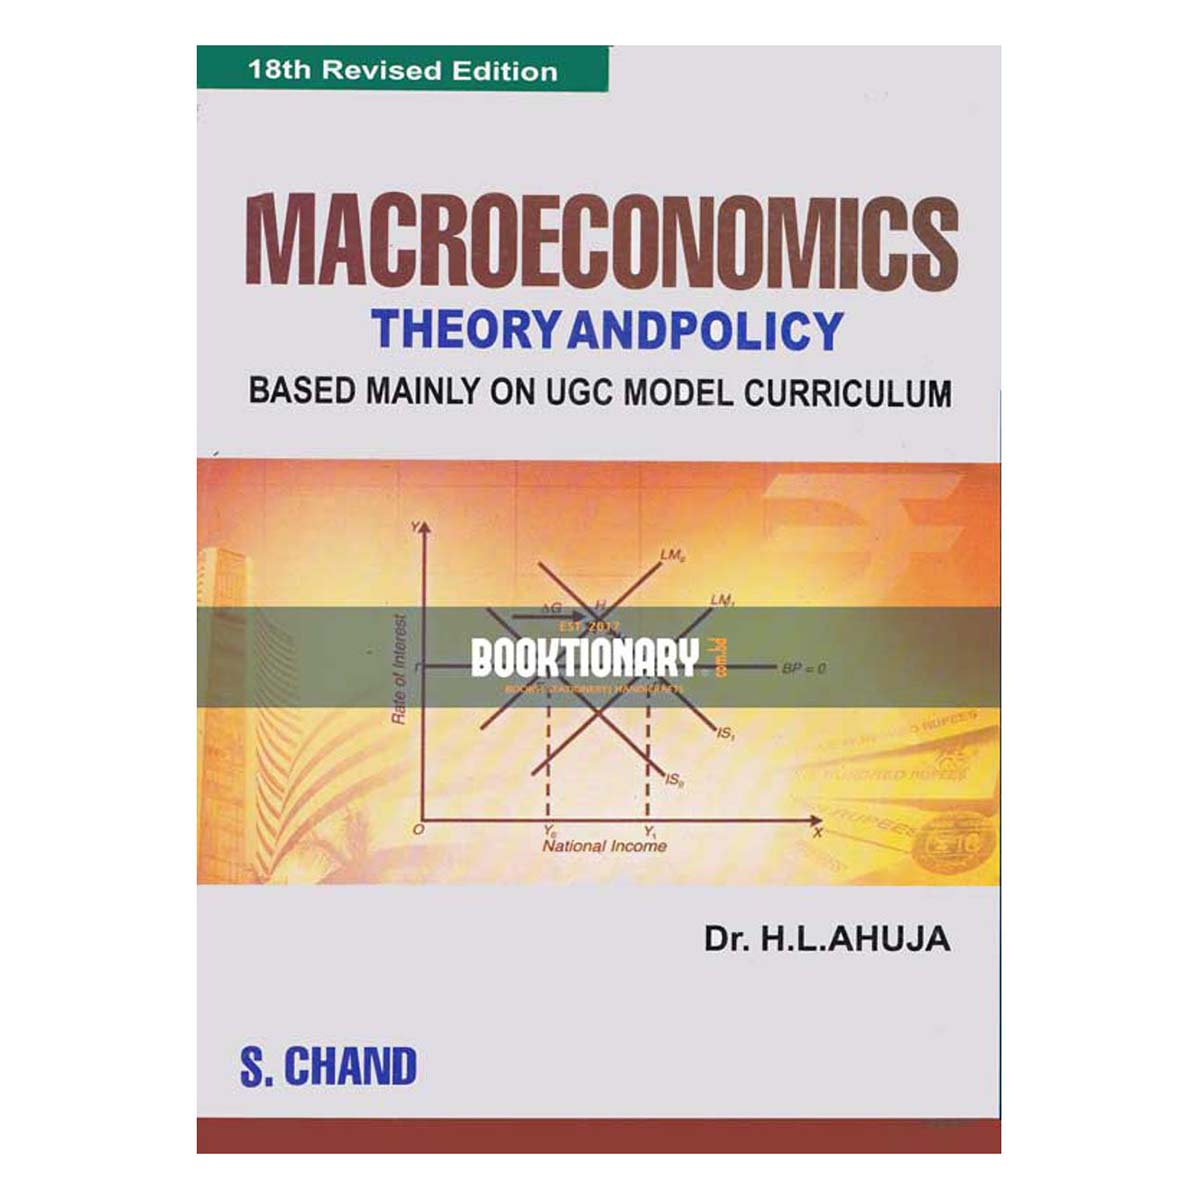 Macroeconomics Theory Andpolicy (Dr. H.L. Ahuja)